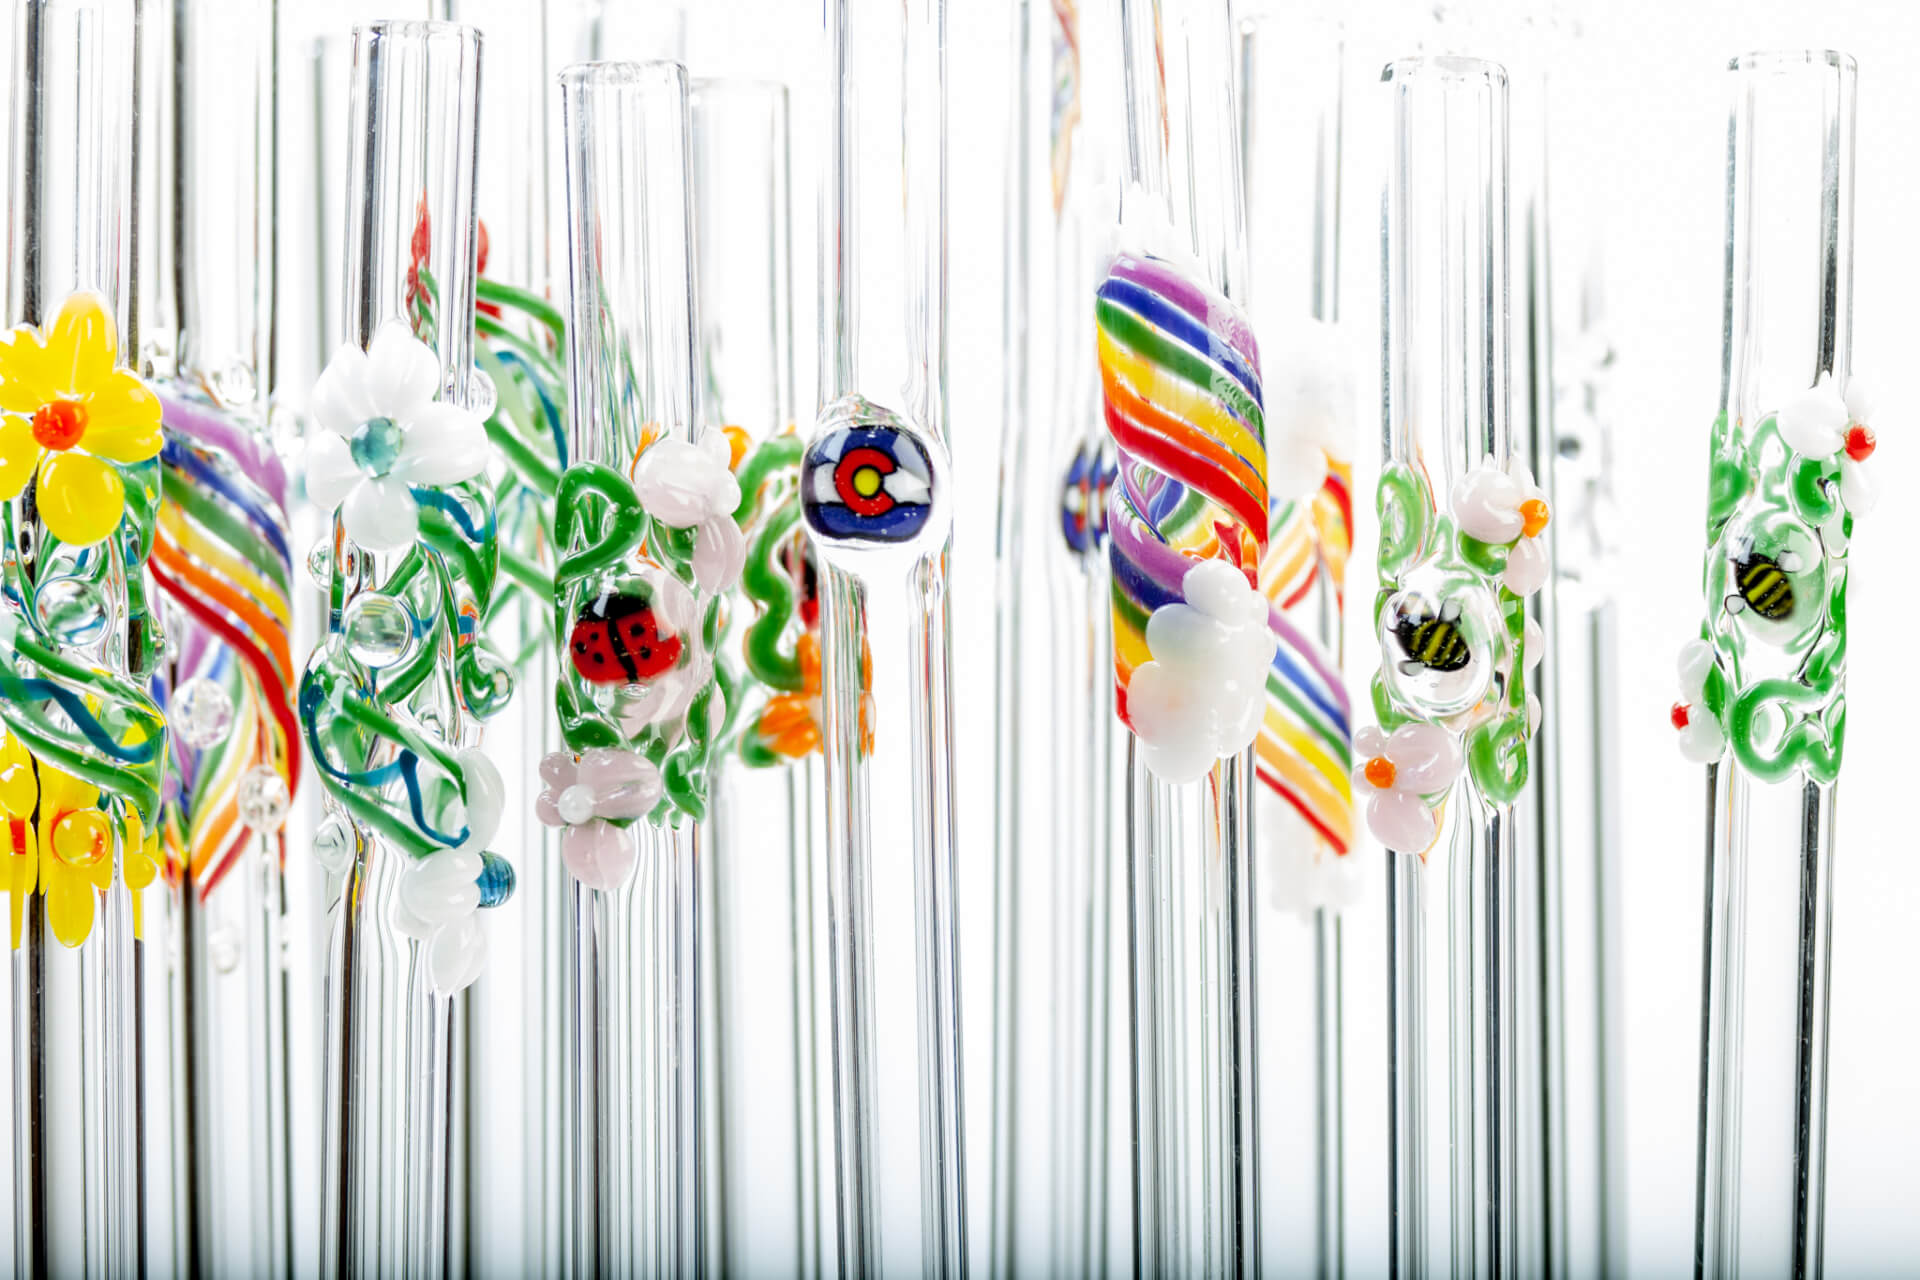 Details about   Glass Smoothie or Soup Straws Made in Colorado by Thestrazspot Hand Blown 